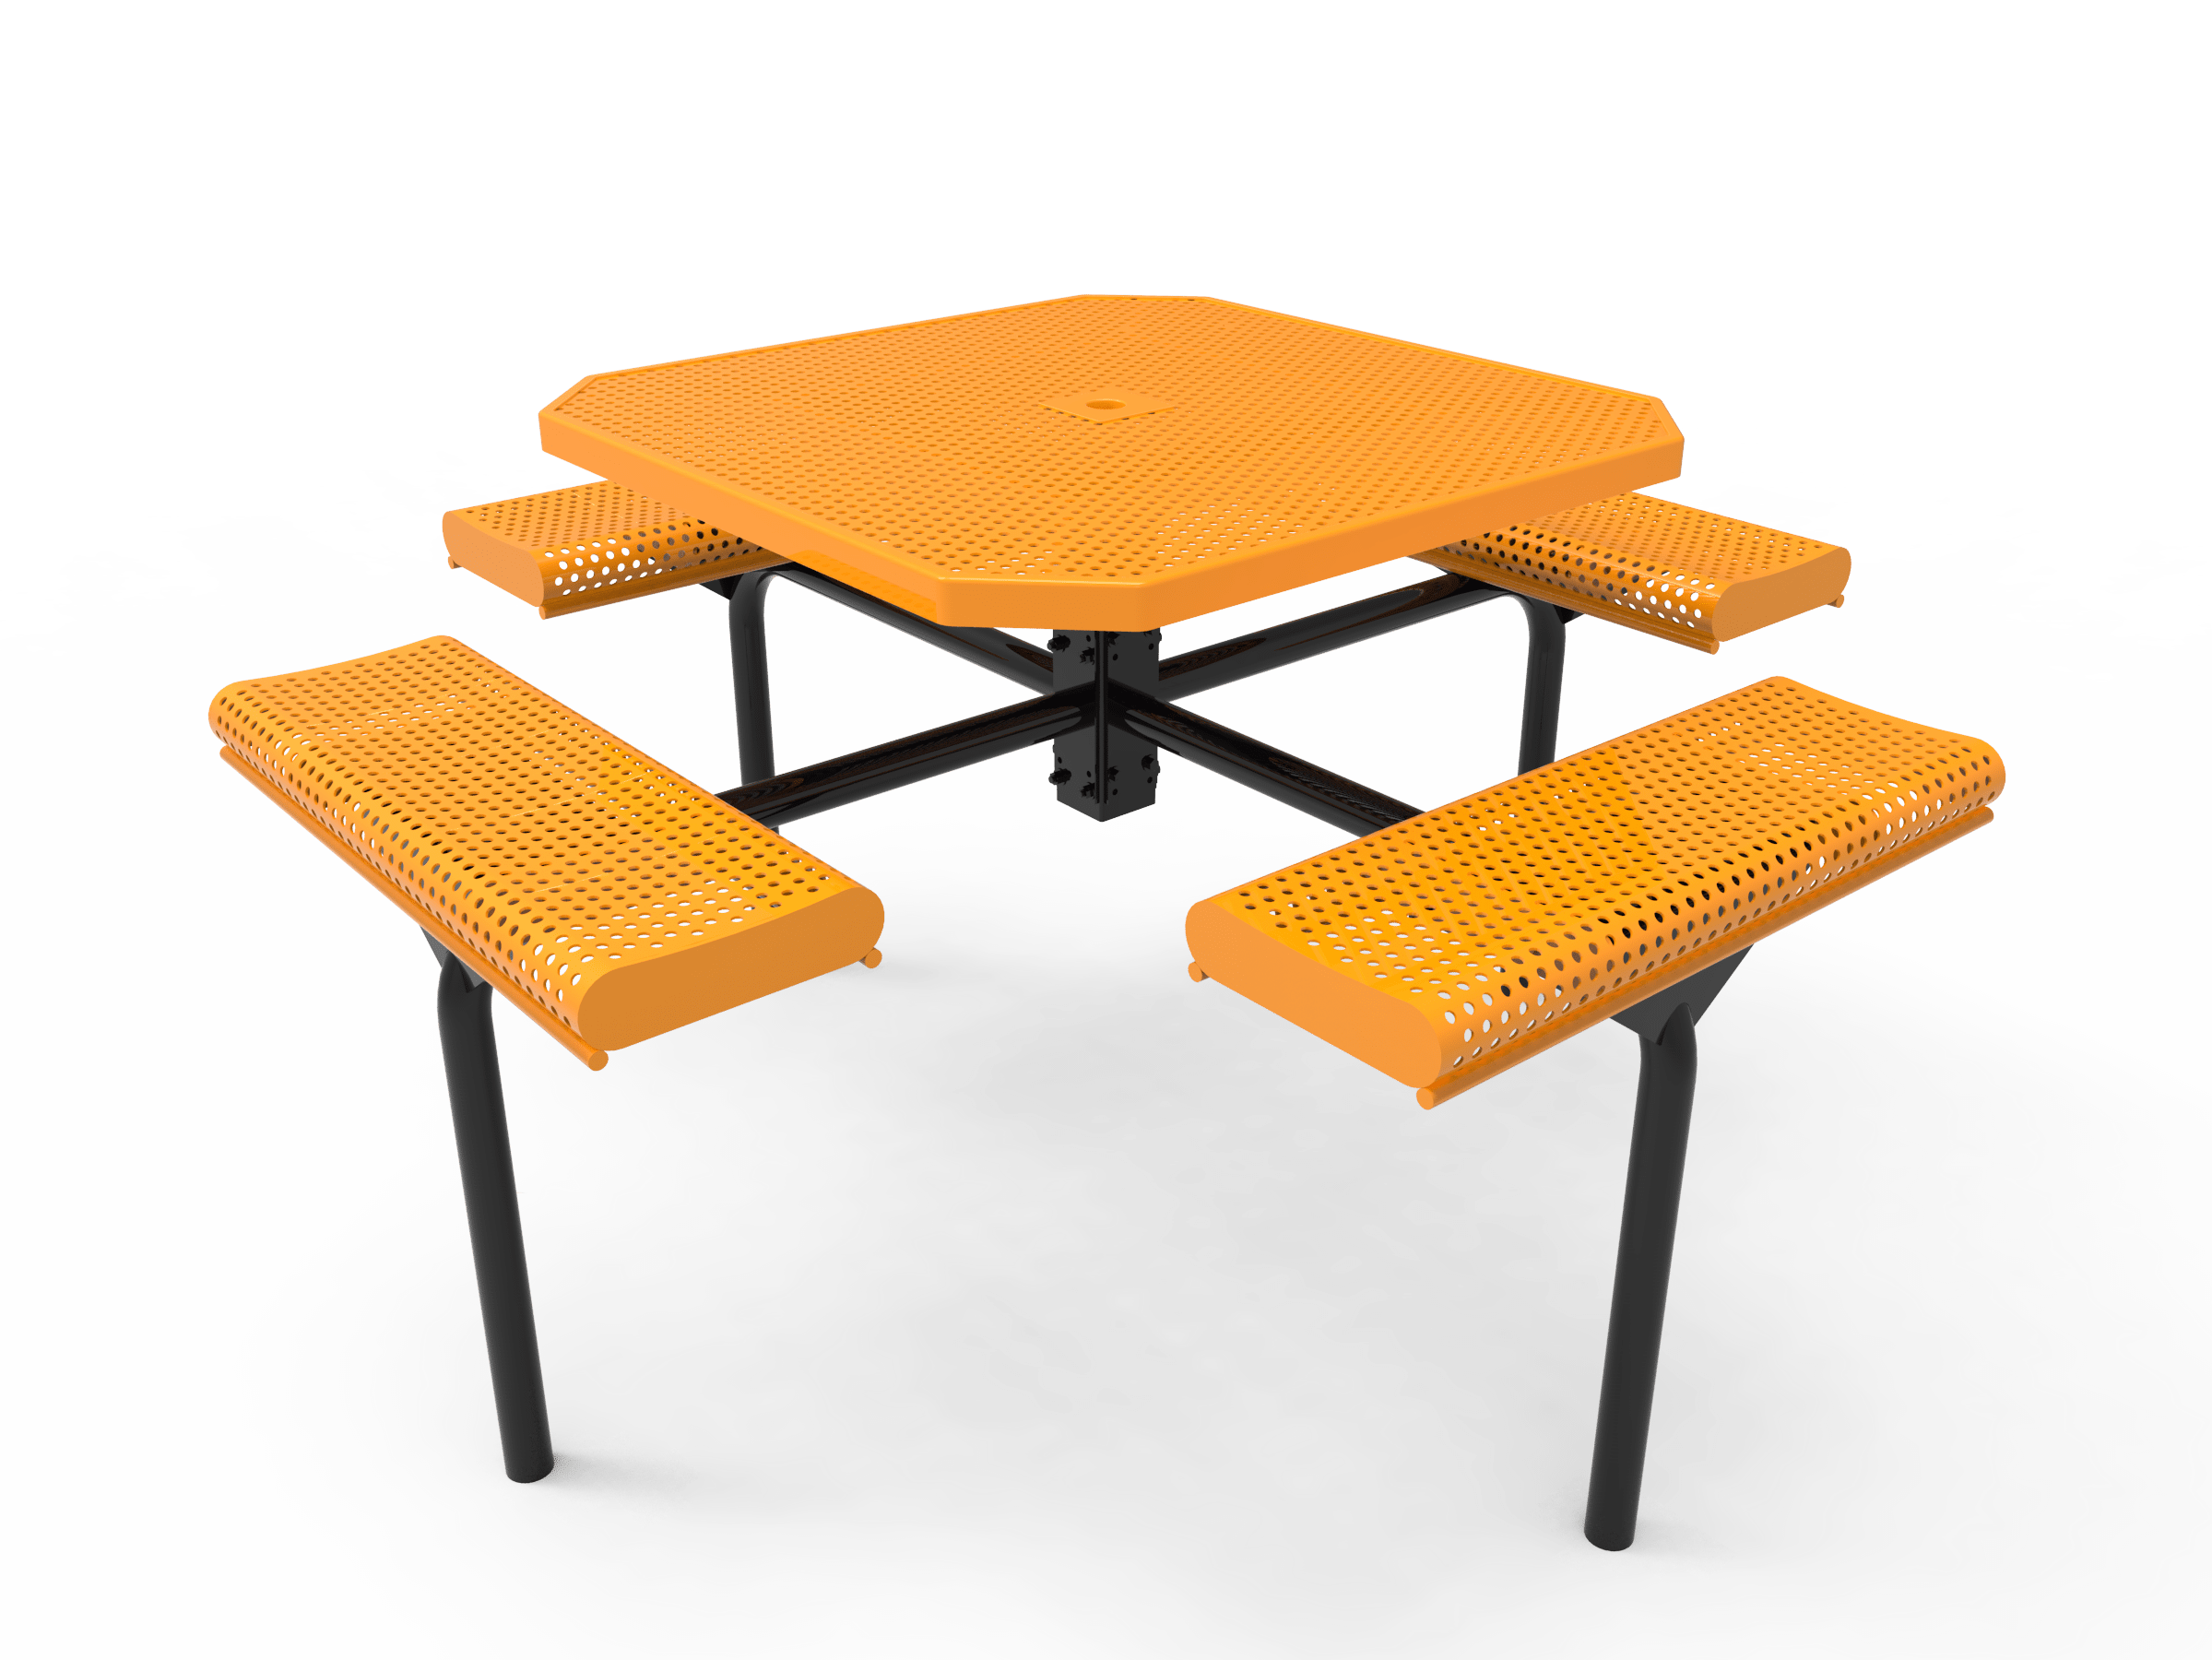 46″ Oct Nexus In Ground Table With 4 Rolled Seats-Punched
TOR46-D-47-000
Industry Standard Finish
$1809.00
TOR46-B-47-000
Advantage Premium Finish
$2269.00
